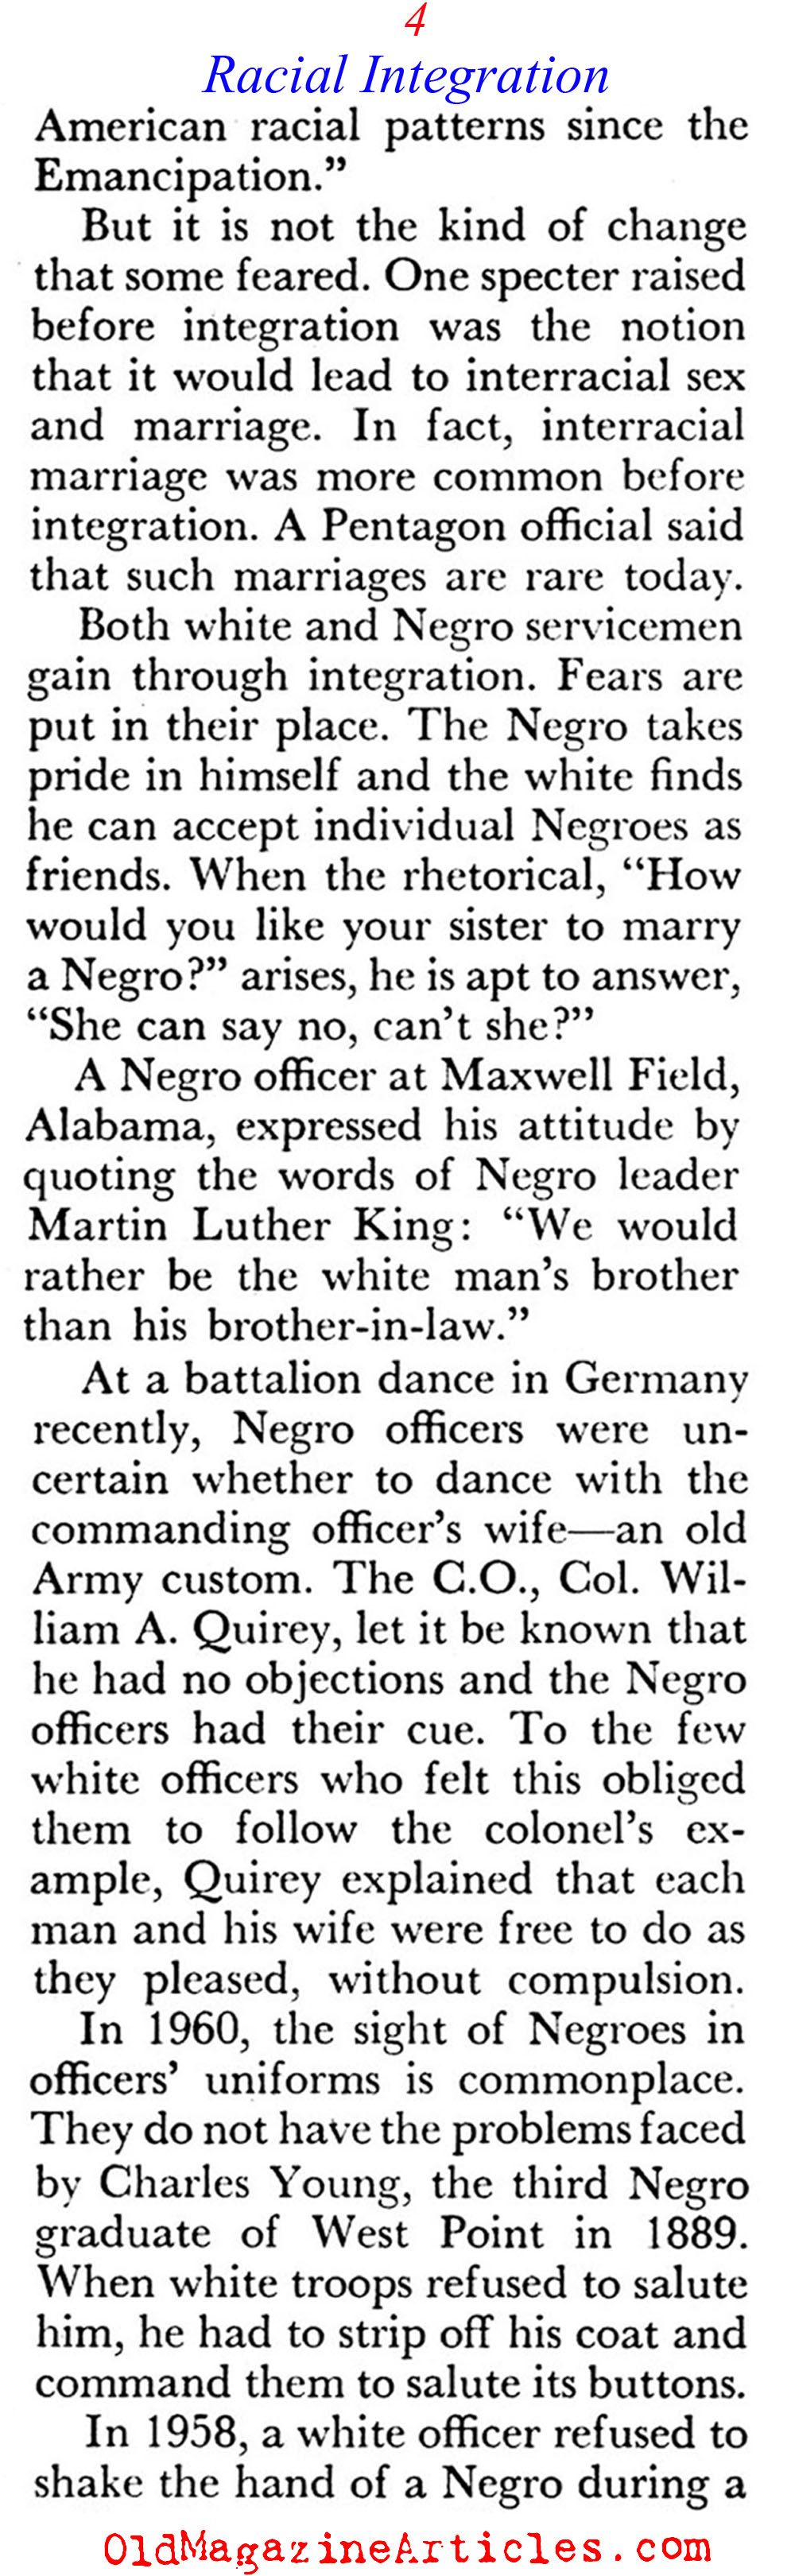 Racial Integration in the U.S. Army   (Coronet Magazine, 1960)